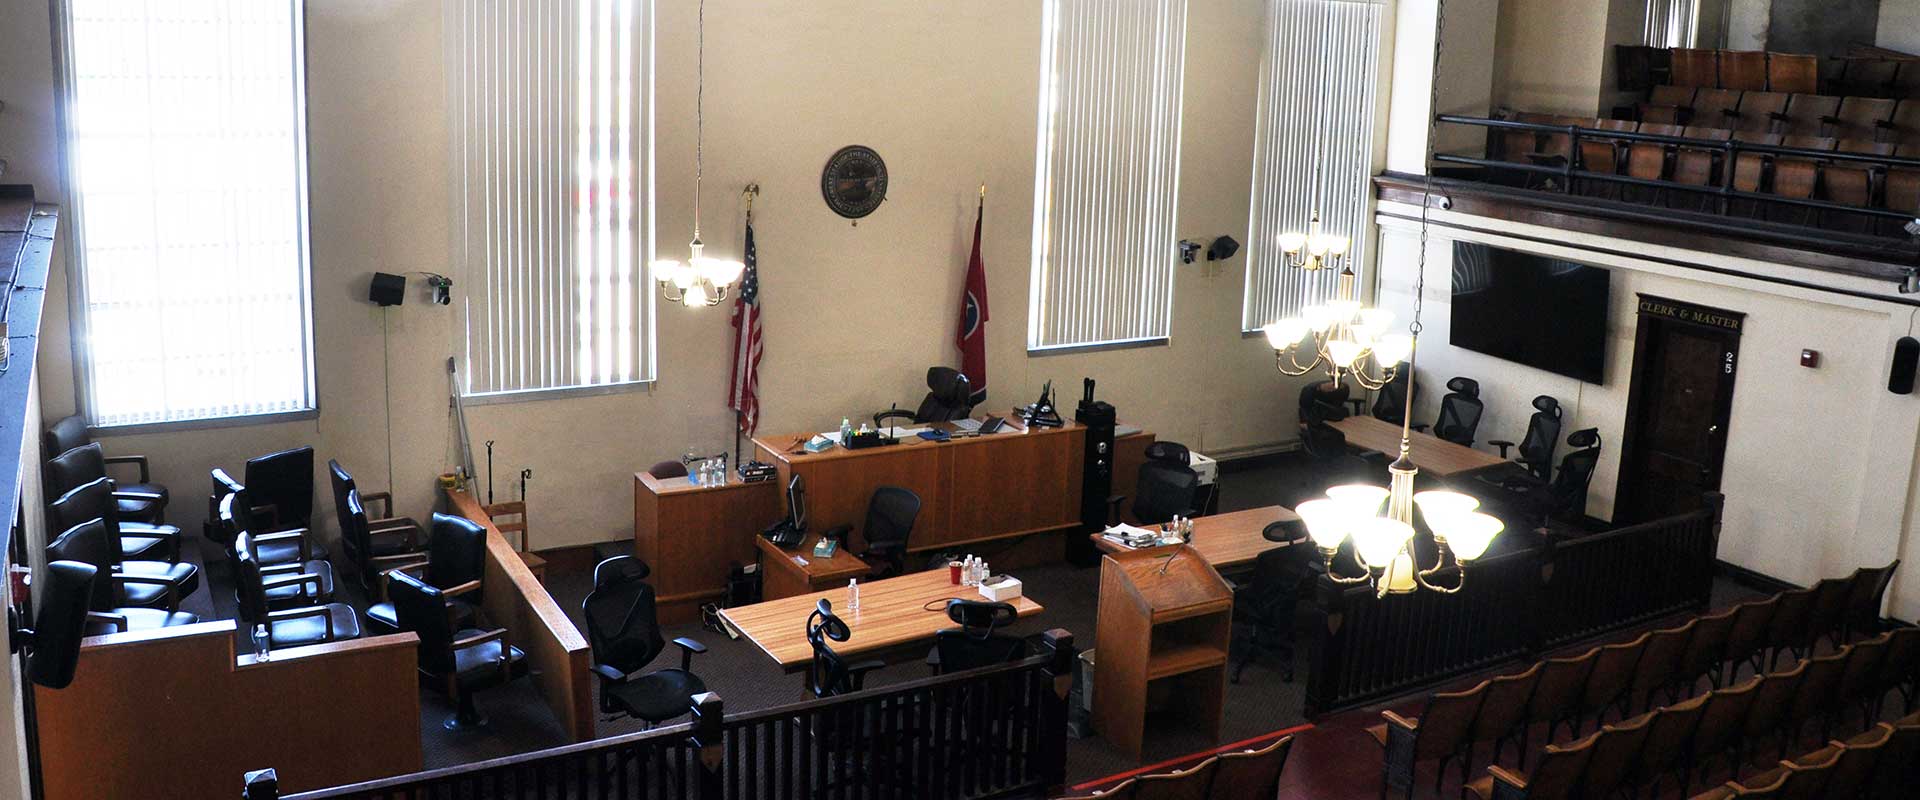 perrycounty courtroom 1920x800